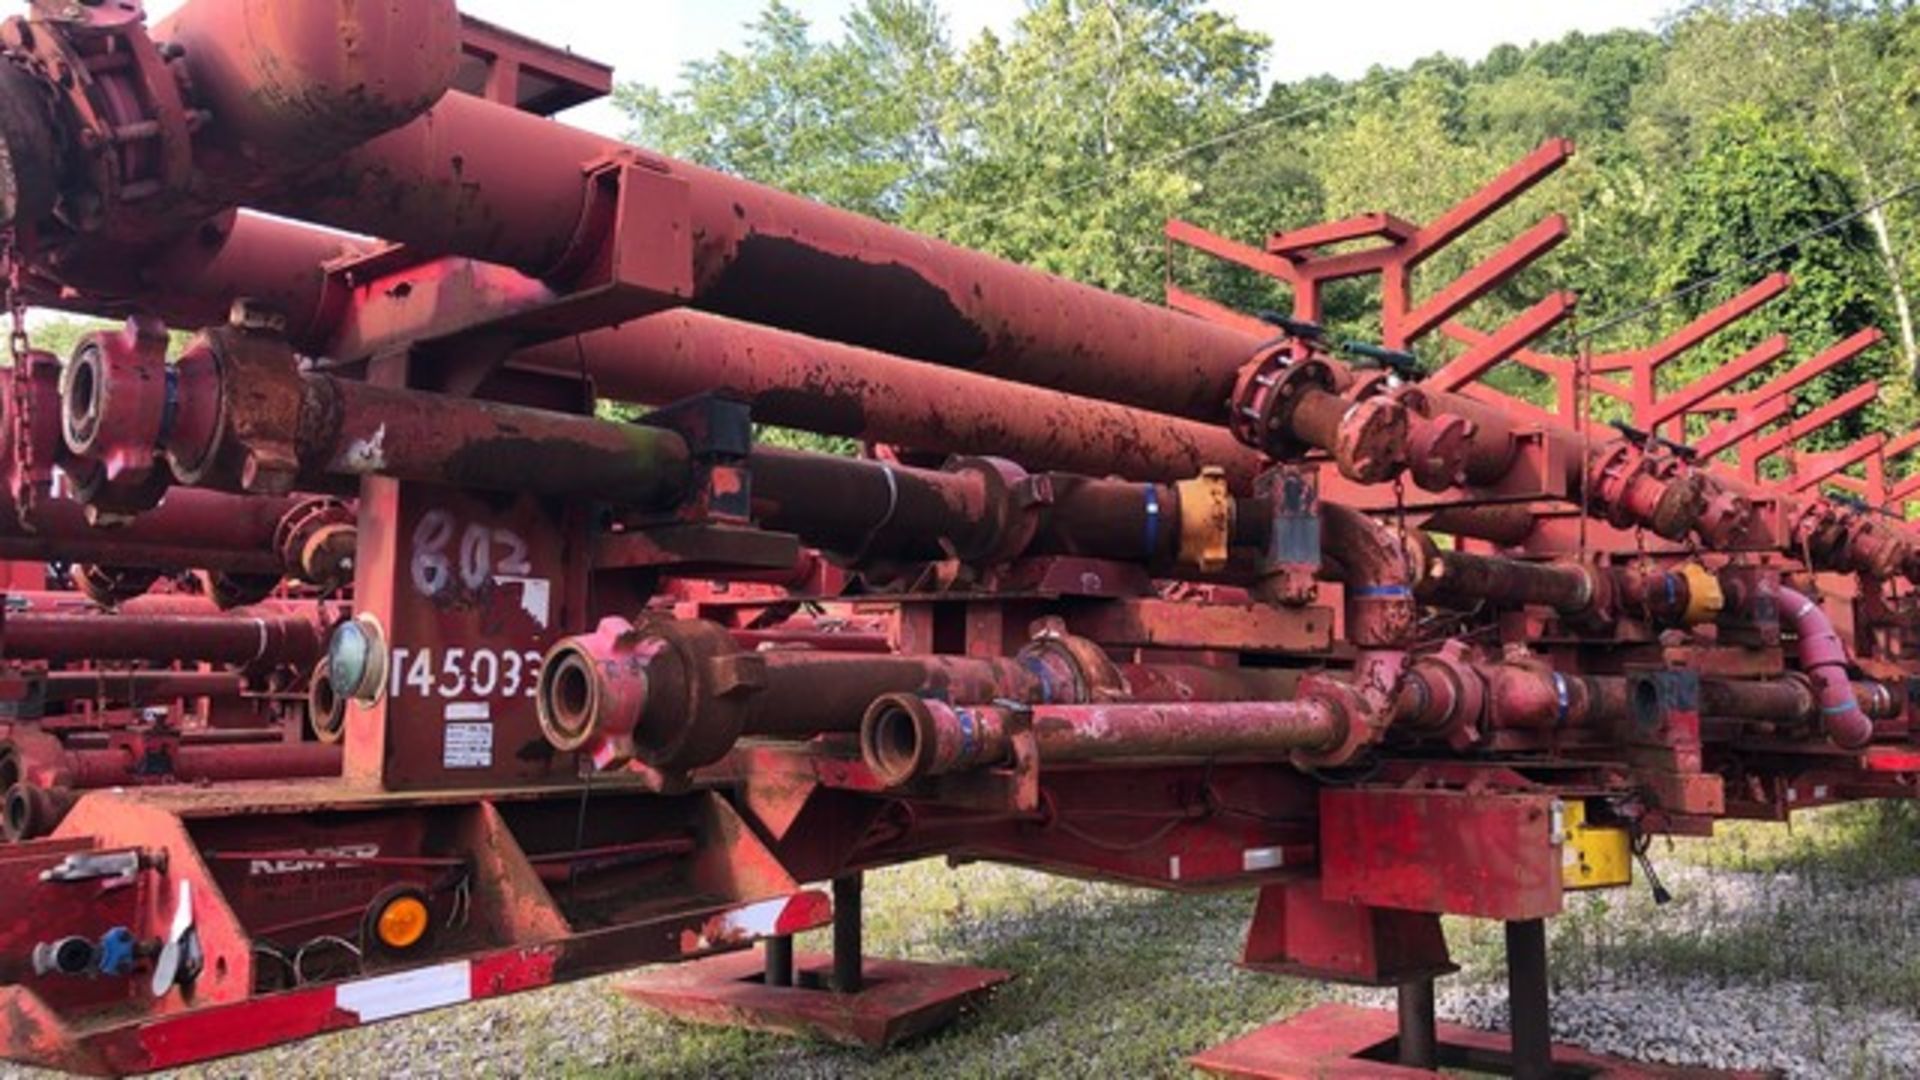 Located in YARD 6 - Buckhannon, WV (802) (X) BO'S BETTER BUILT HIGH PRESSURE S/A MANIFOLD TRAILER, - Image 3 of 4